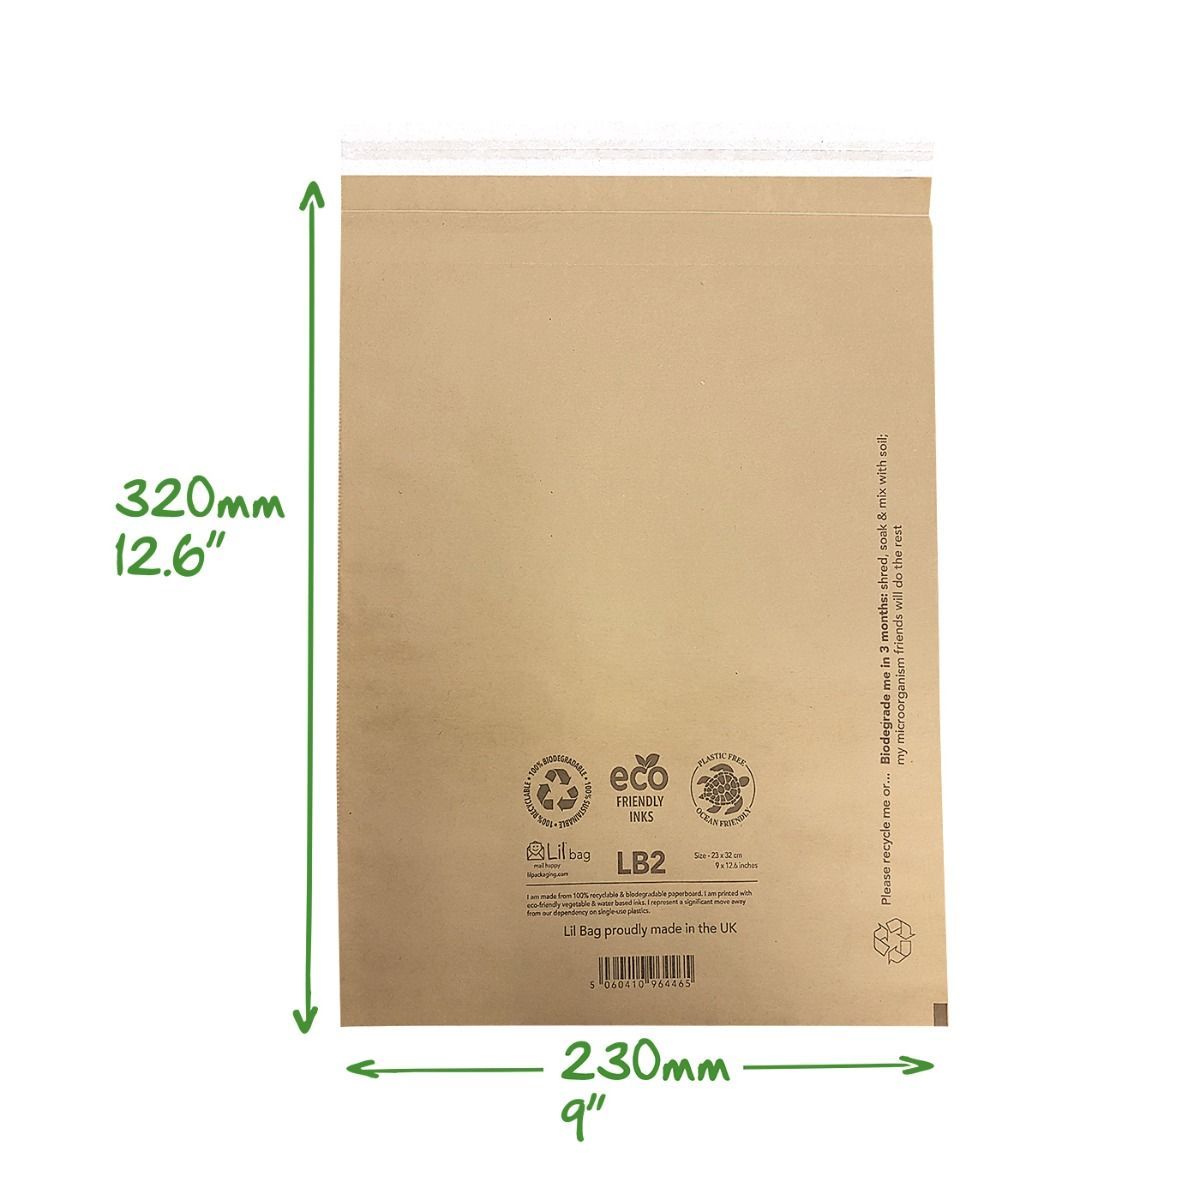 50Pcs/Lot New 100% D2W Biodegradable Courier Bag Clothing Package Express  Bag Mailer Postal Bag Waterproof Self-Seal Pouch Bags xiaomi | Lazada PH